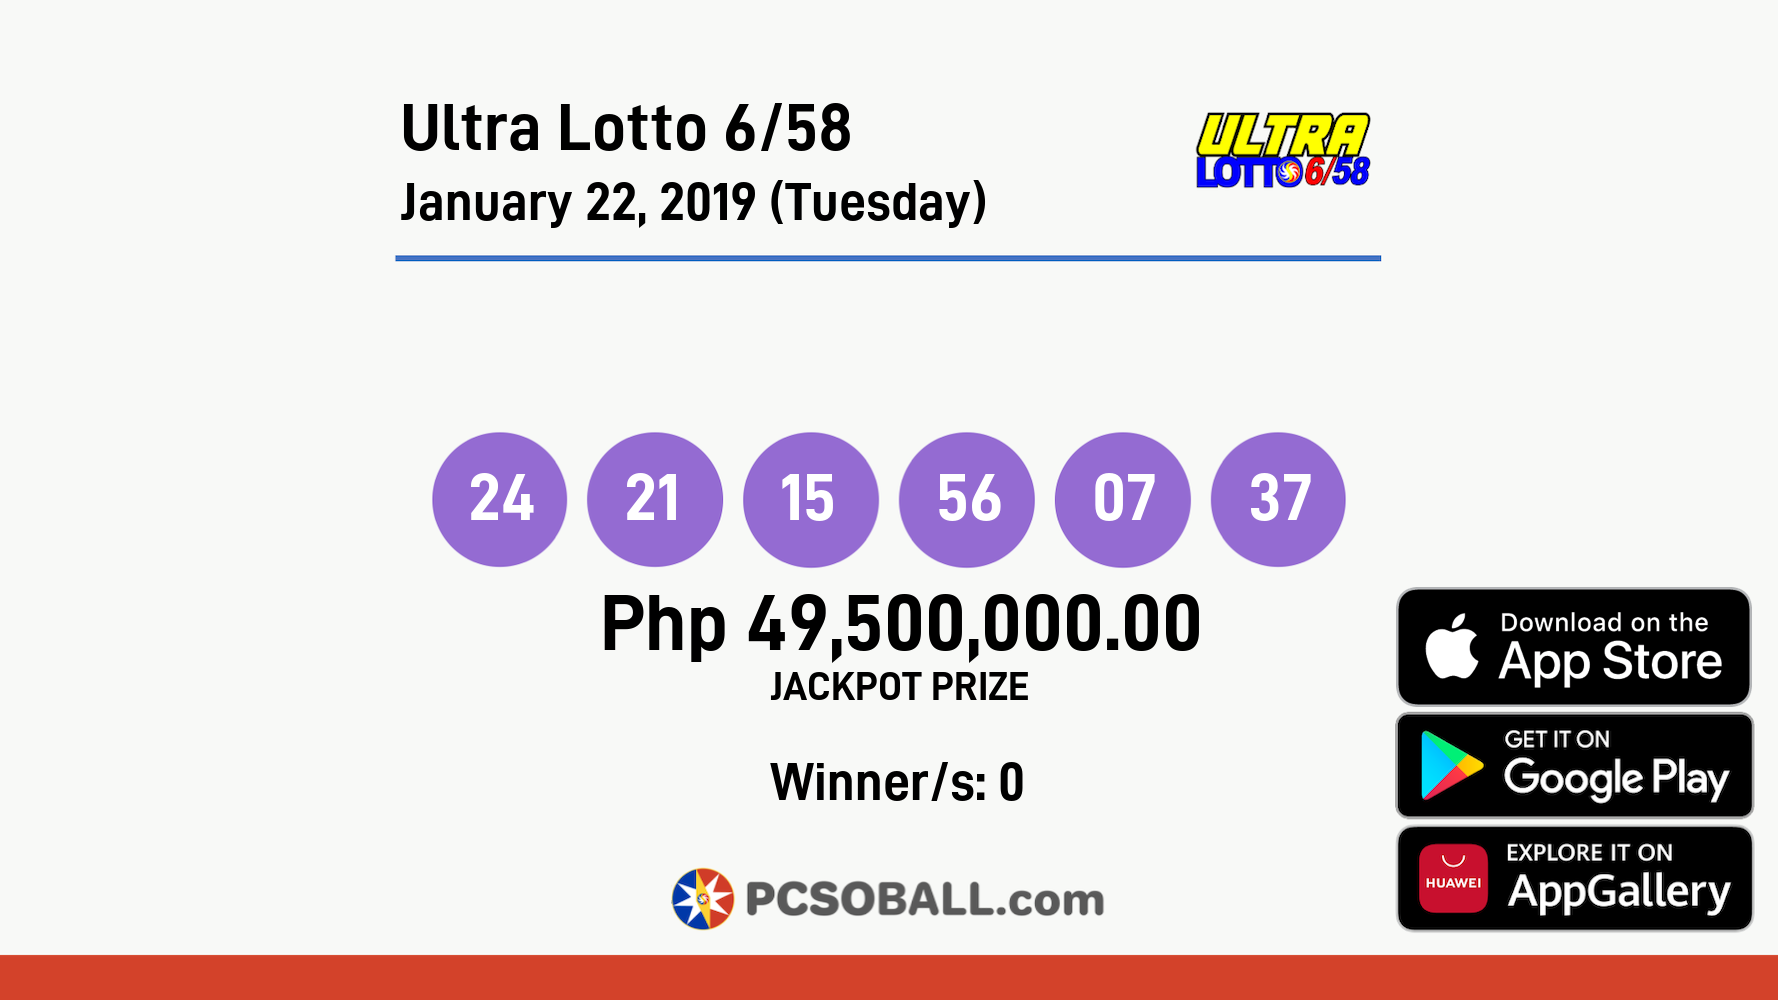 Ultra Lotto 6/58 January 22, 2019 (Tuesday) Result